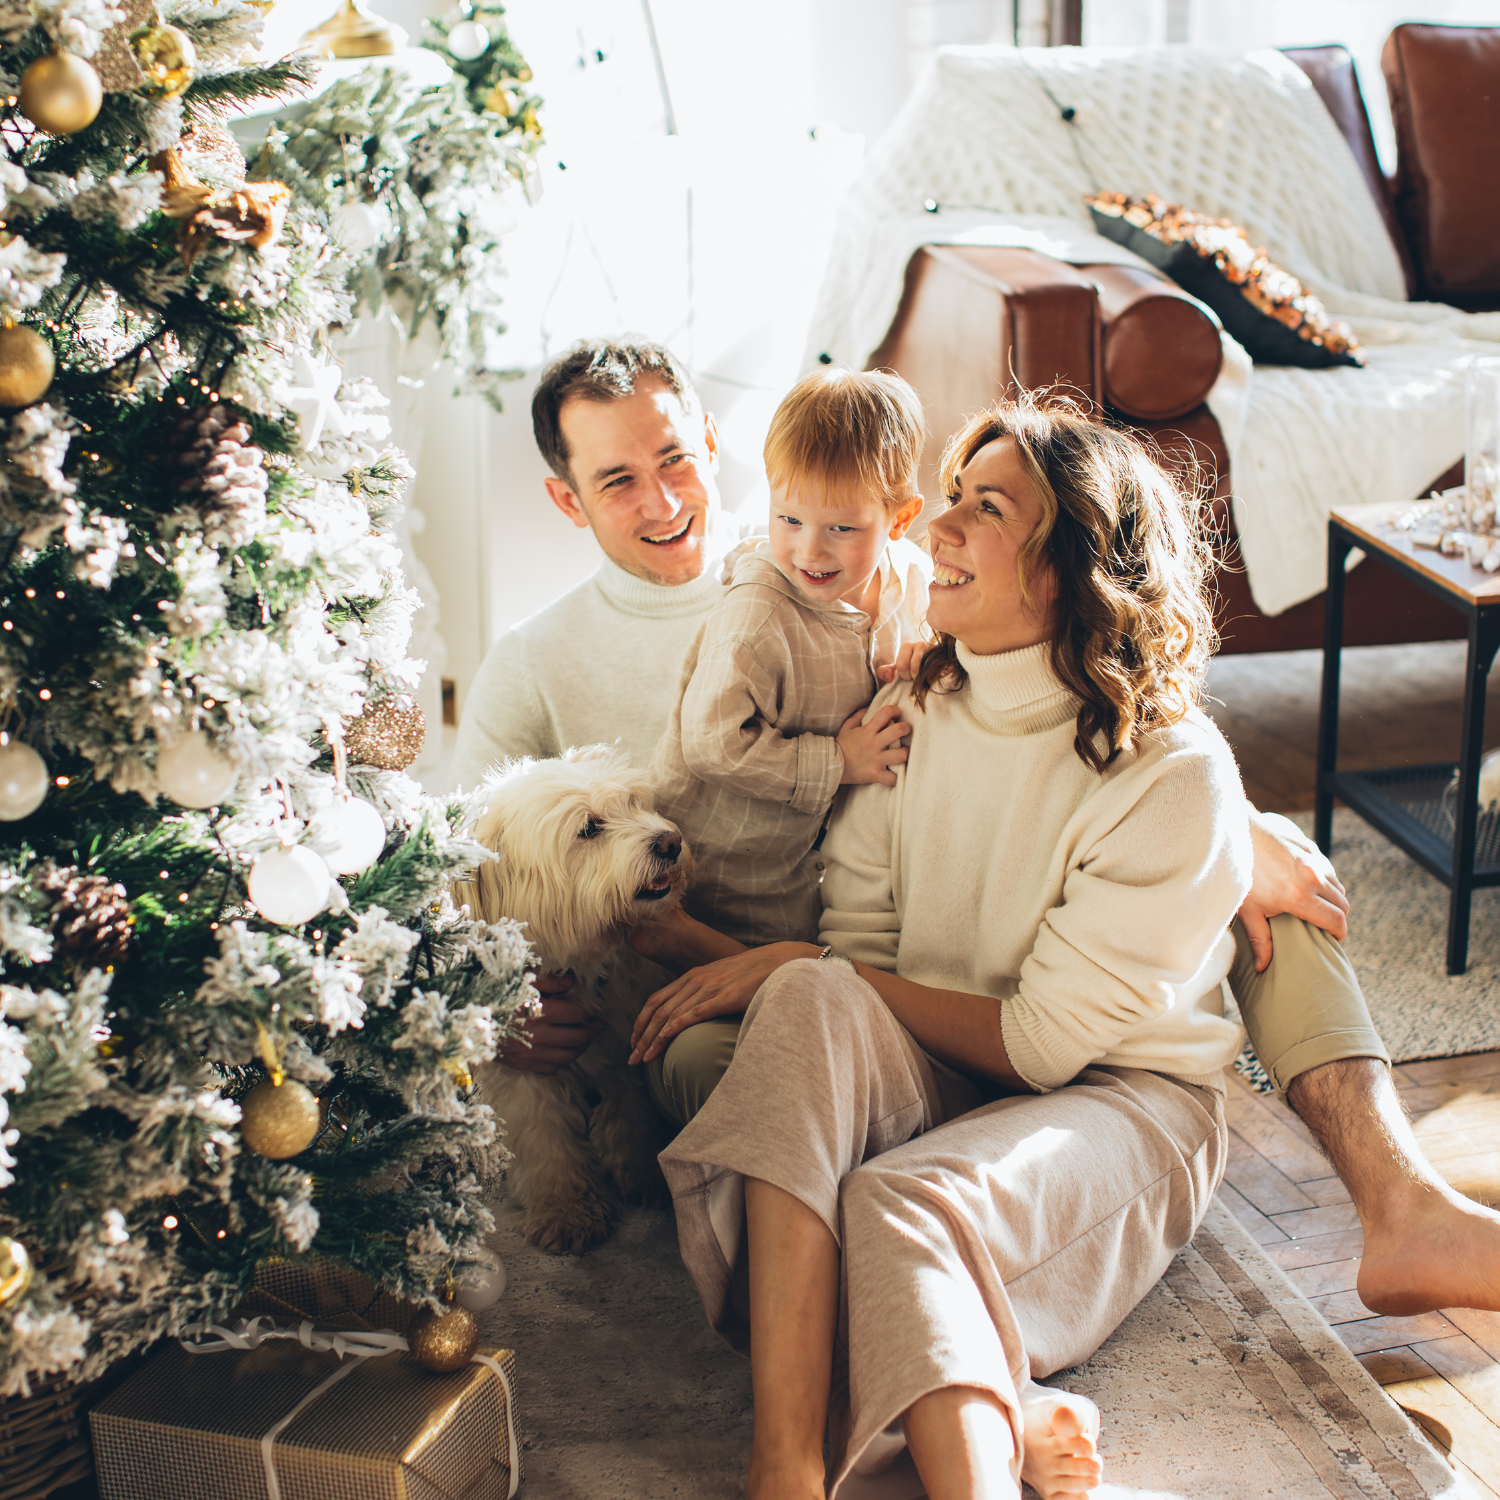 Family with newborn enjoying a family Christmas in front of the tree - Clair de Lune UK